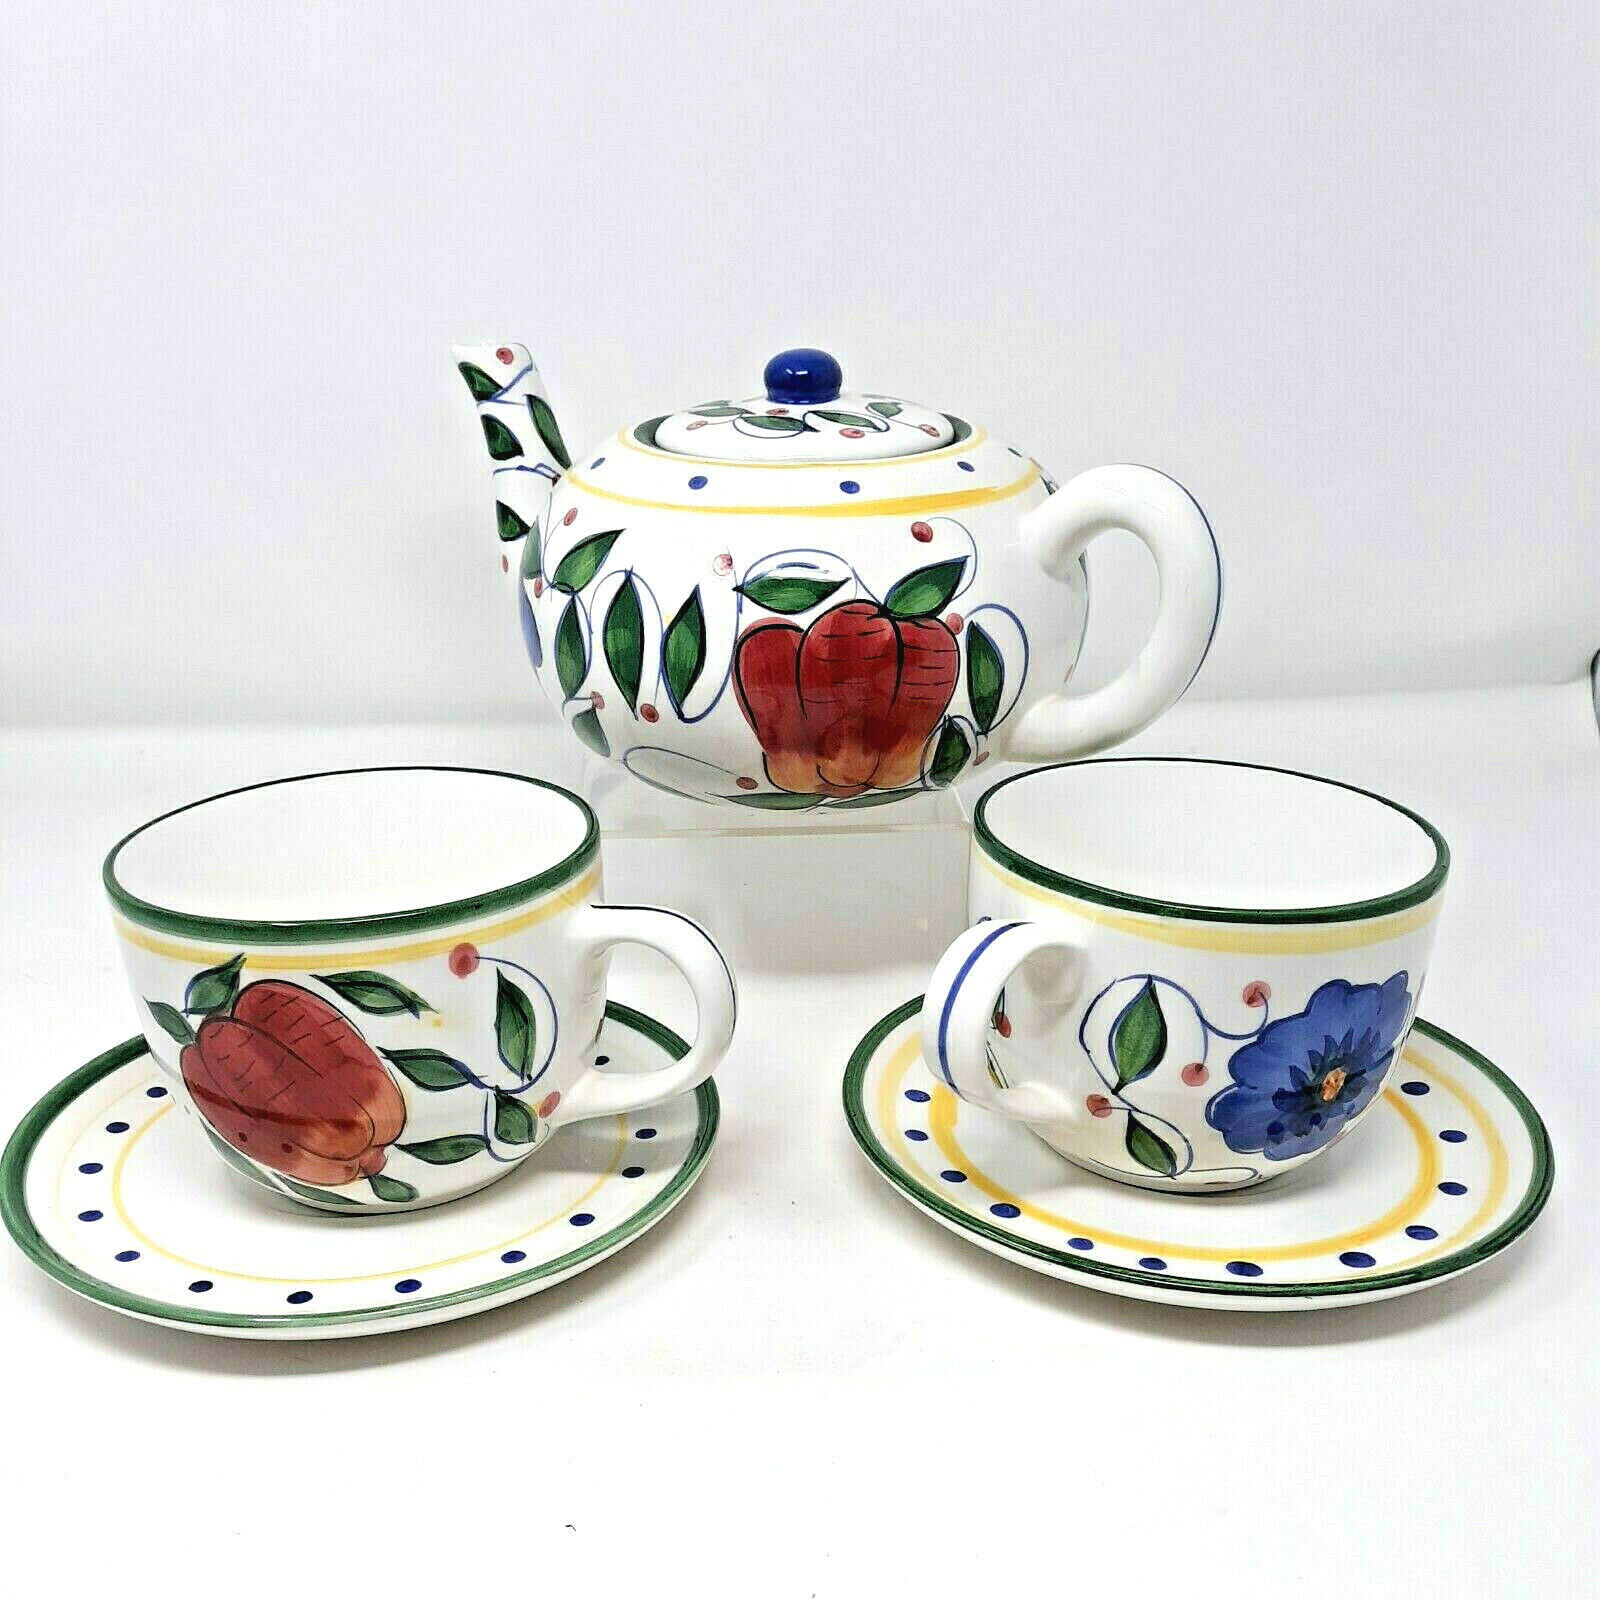 Ceramic Painted Fruit Teapot And Over-sized Tea/soup Mugs And Saucers Jay Import